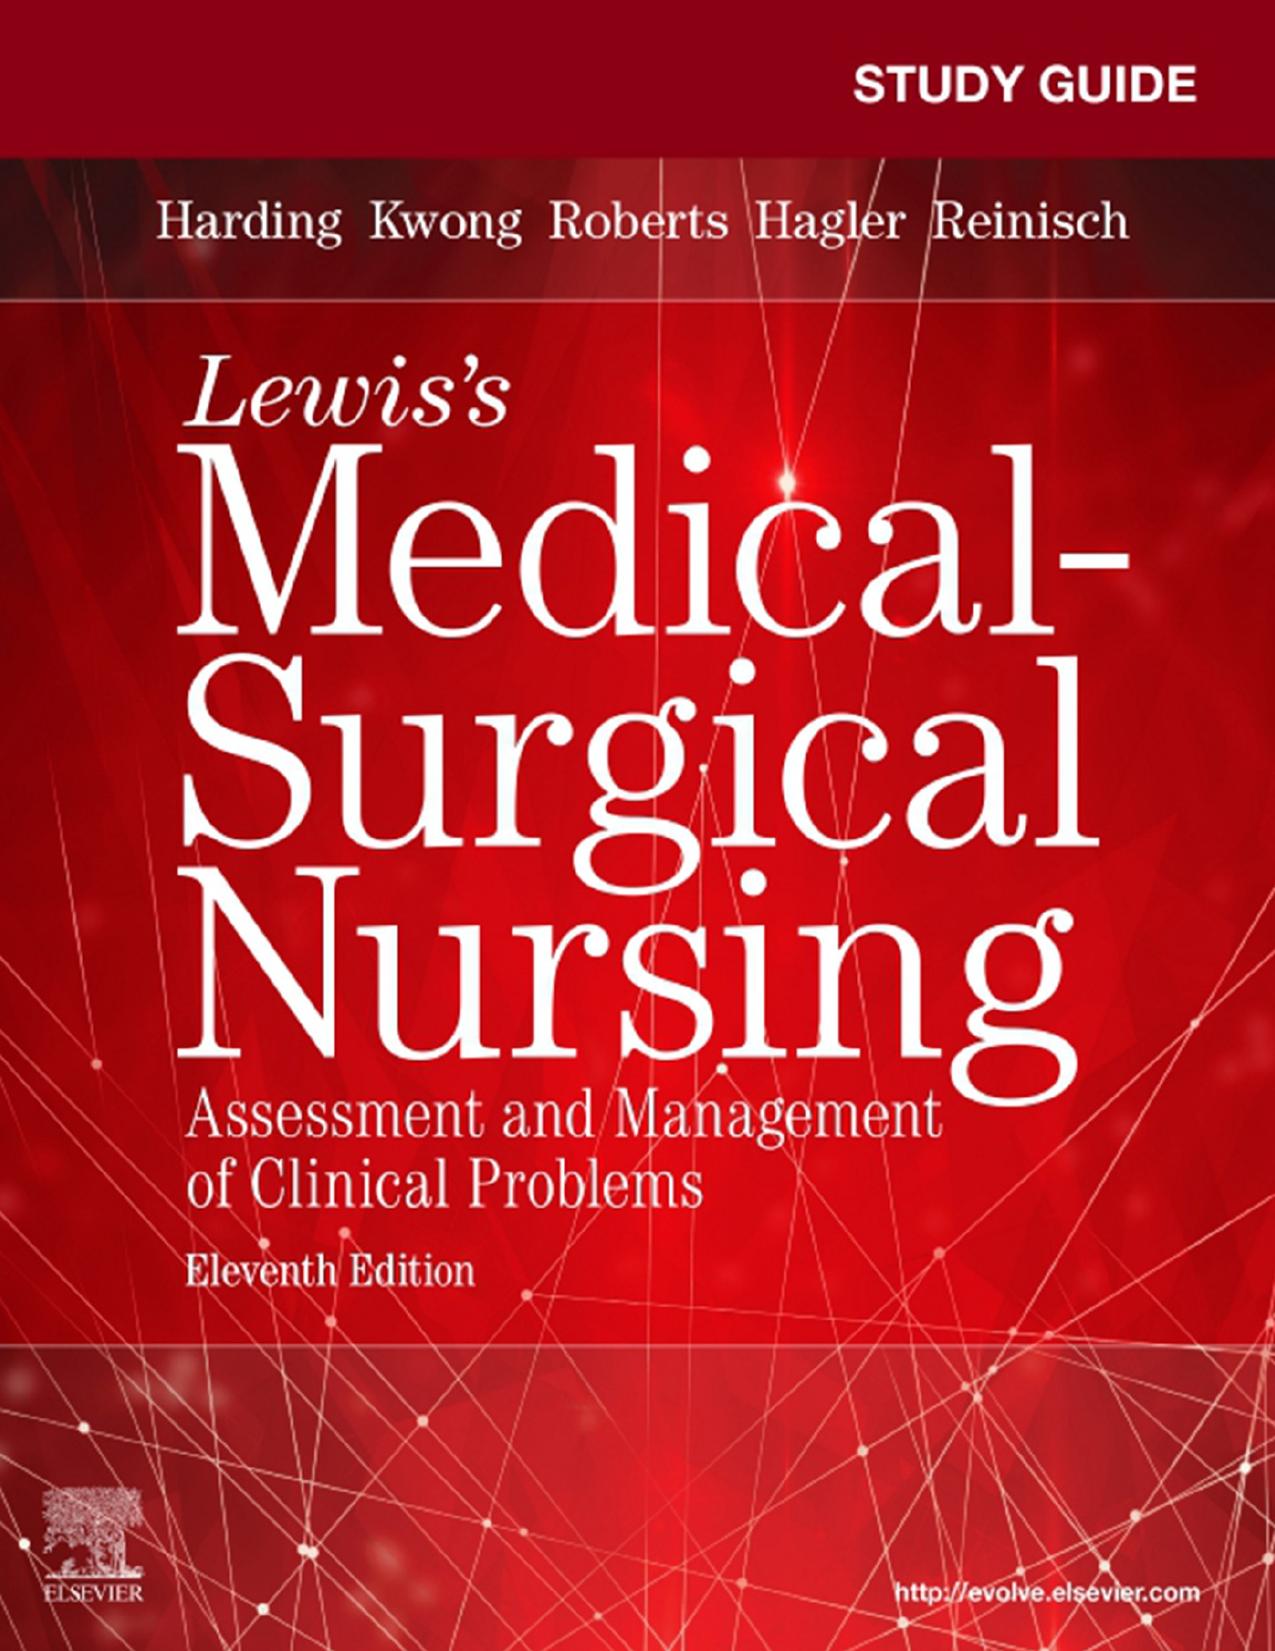 Study Guide for Lewis' Medical-Surgical Nursing - E-Book